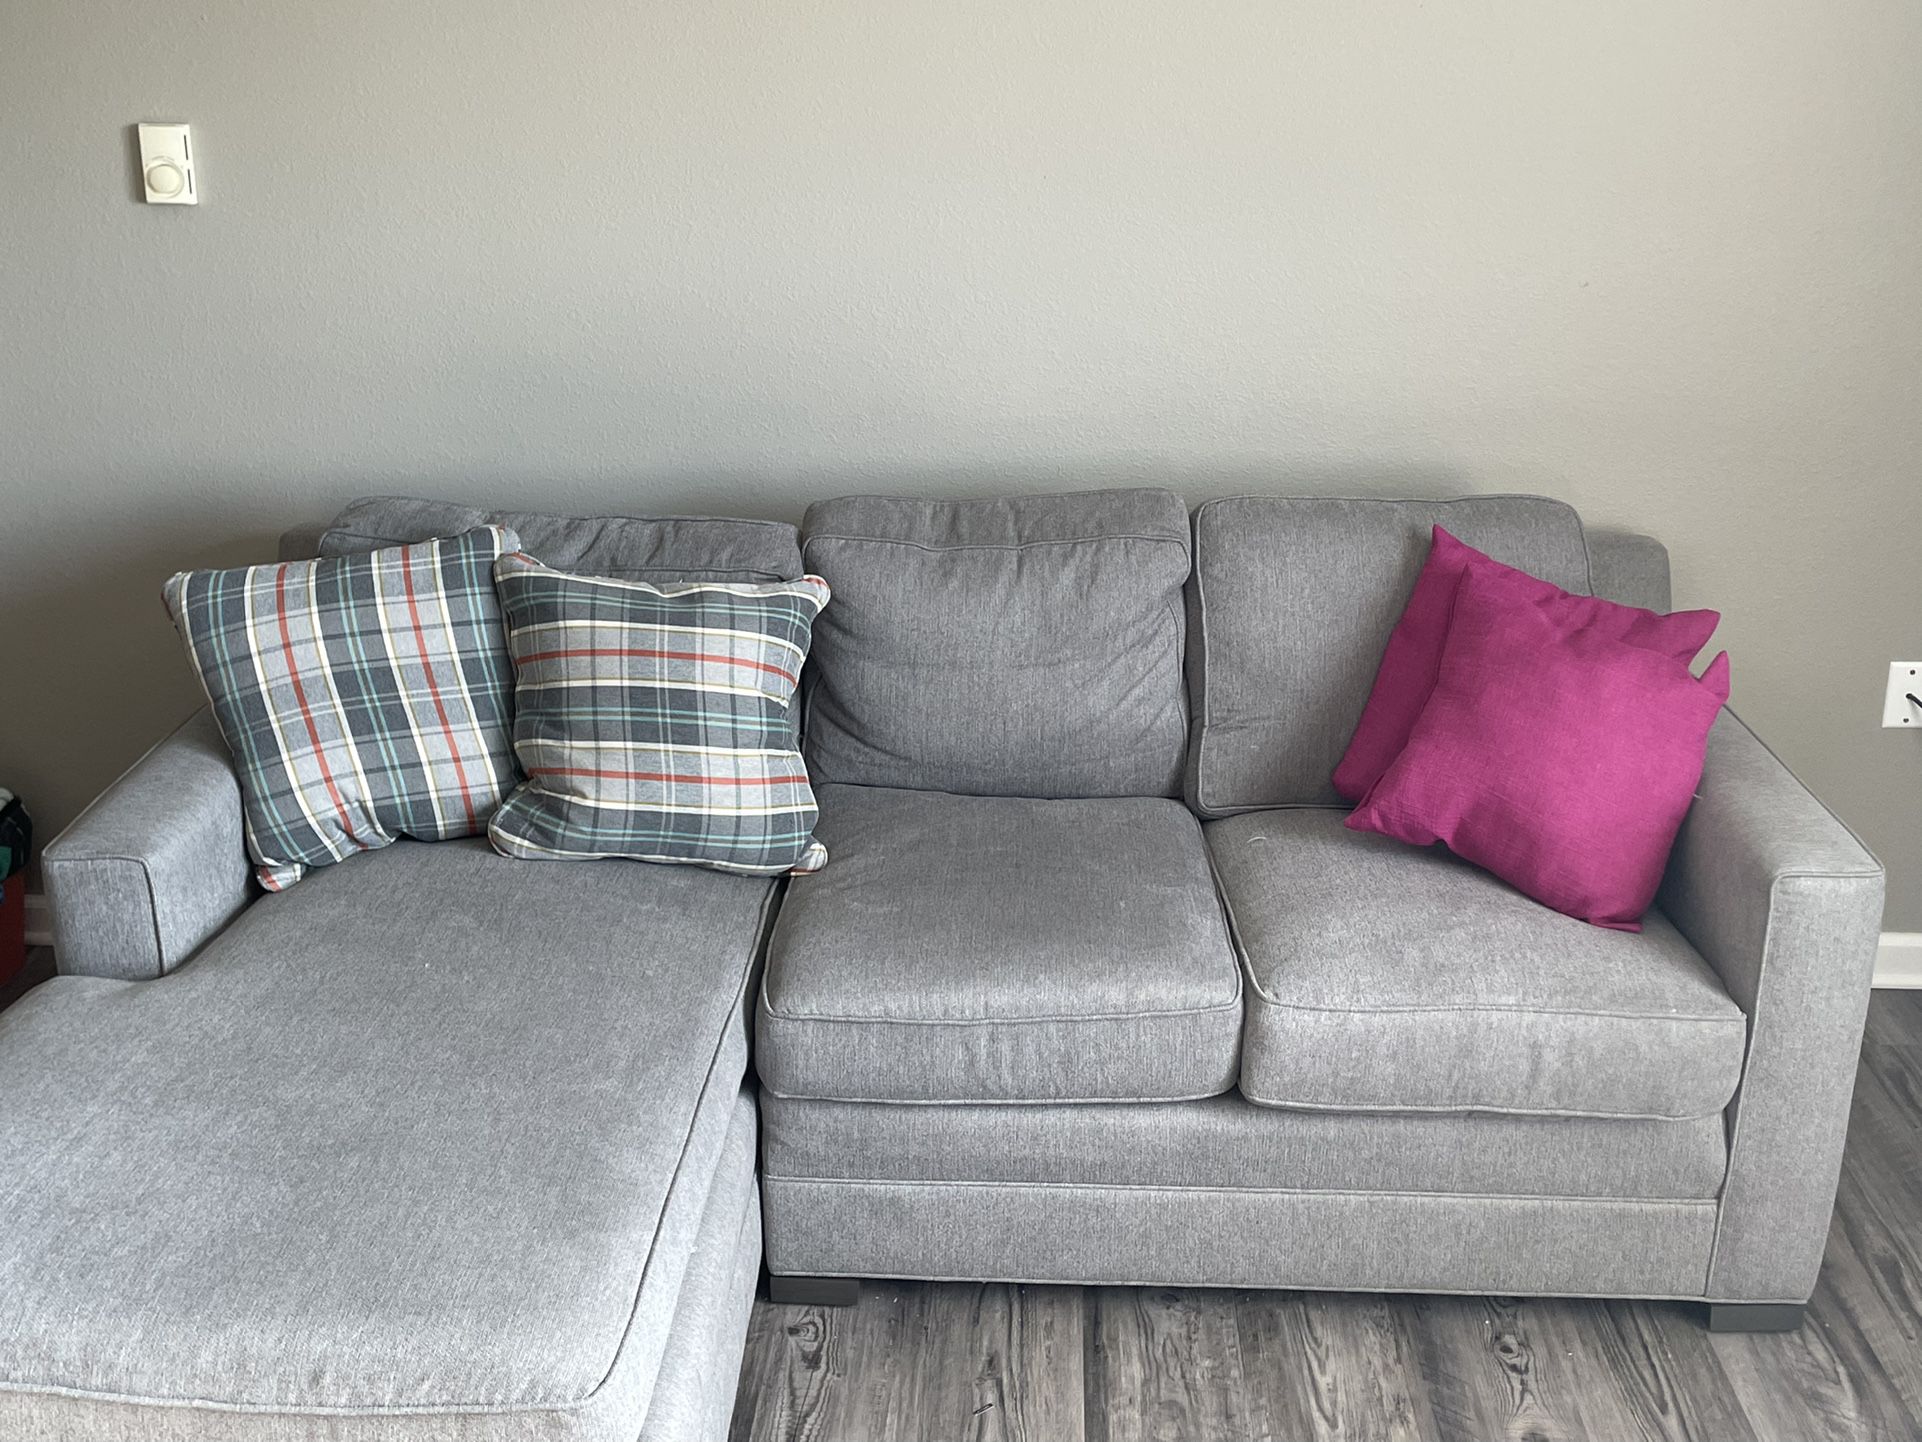 Gray Sofa/couch